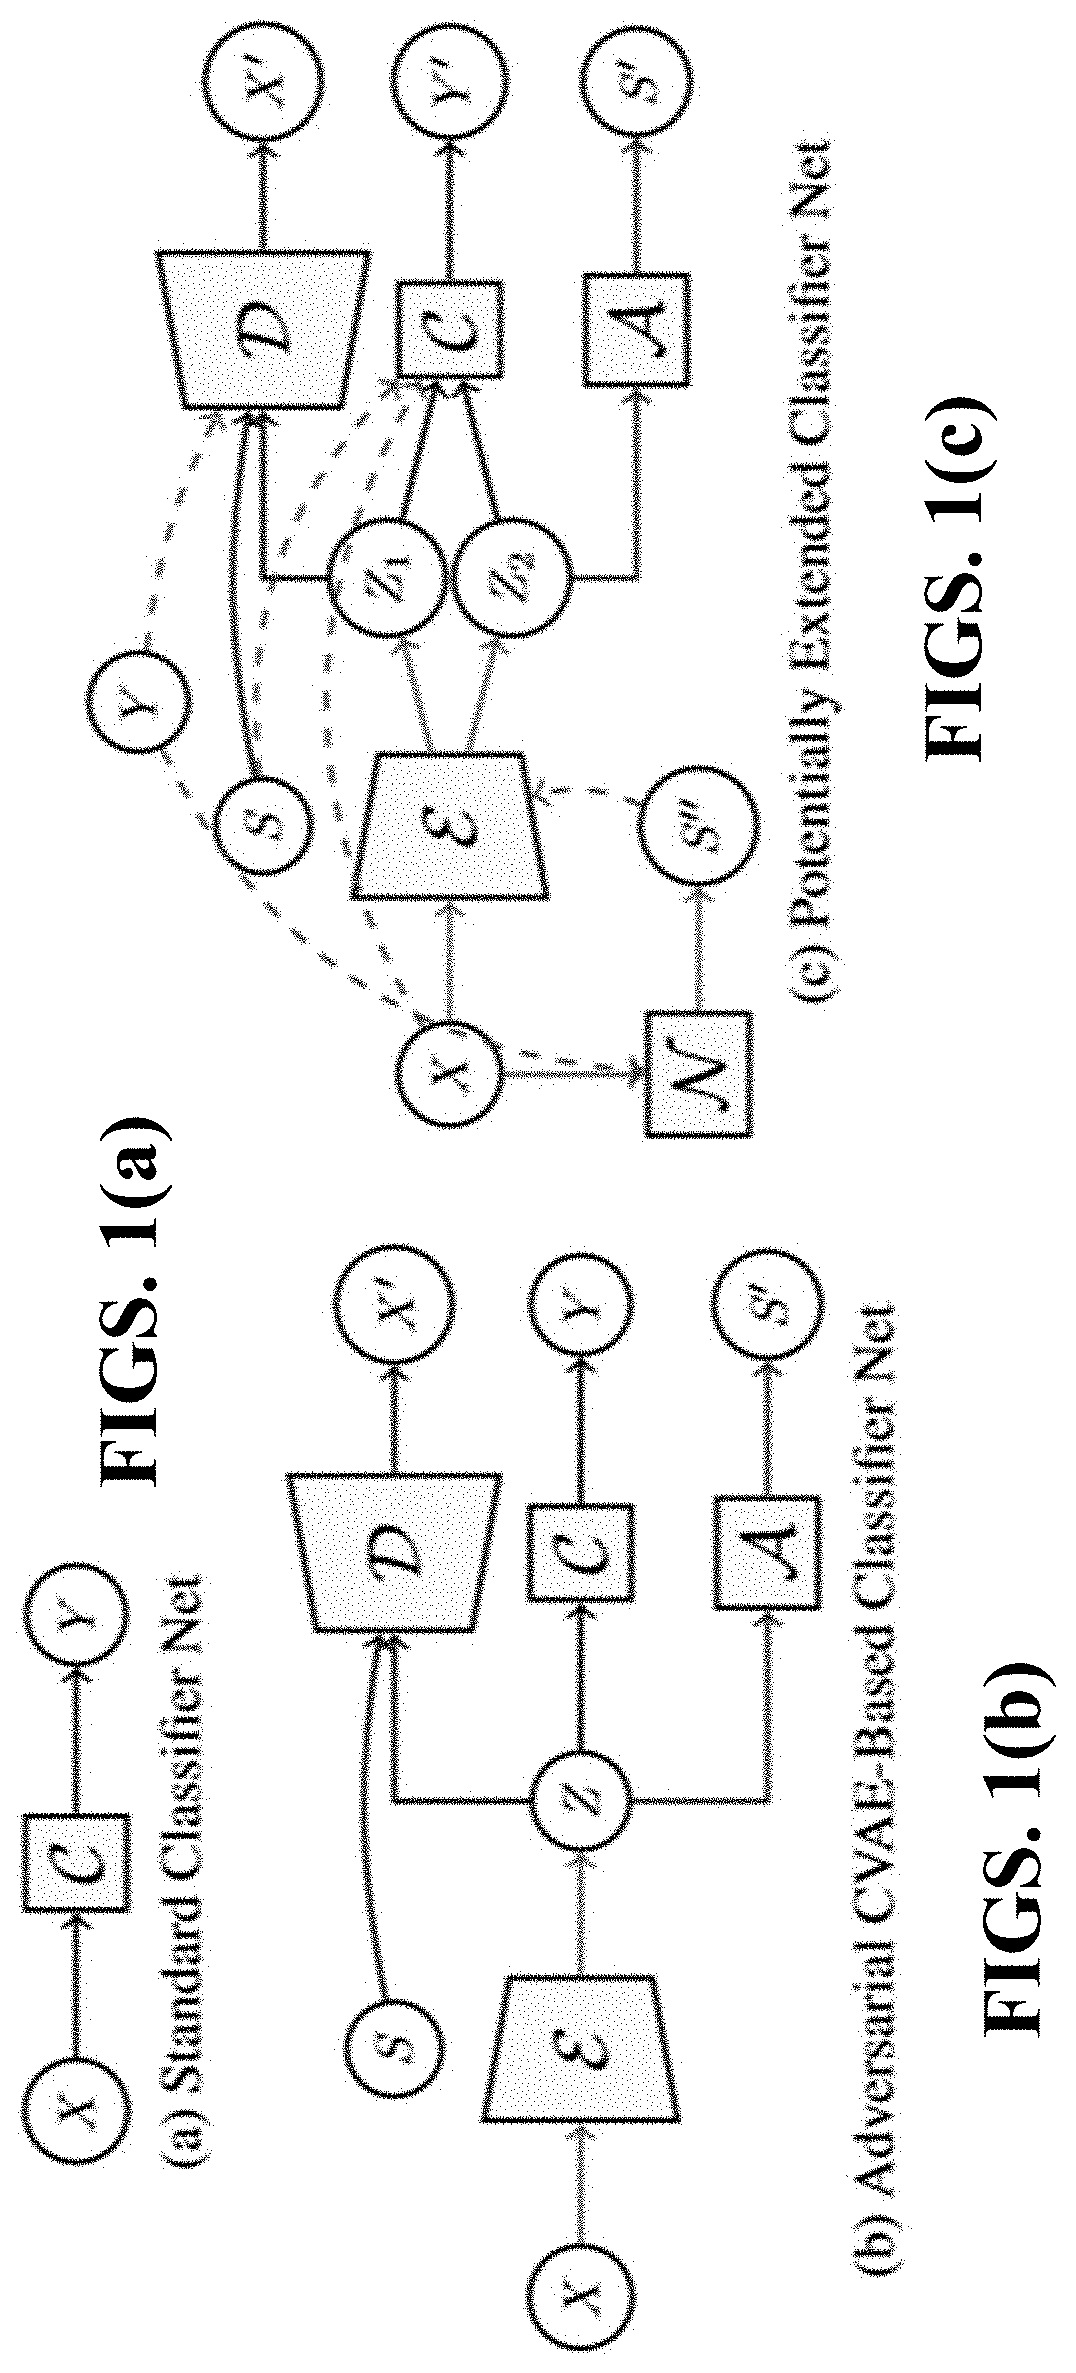 Automated Construction of Neural Network Architecture with Bayesian Graph Exploration